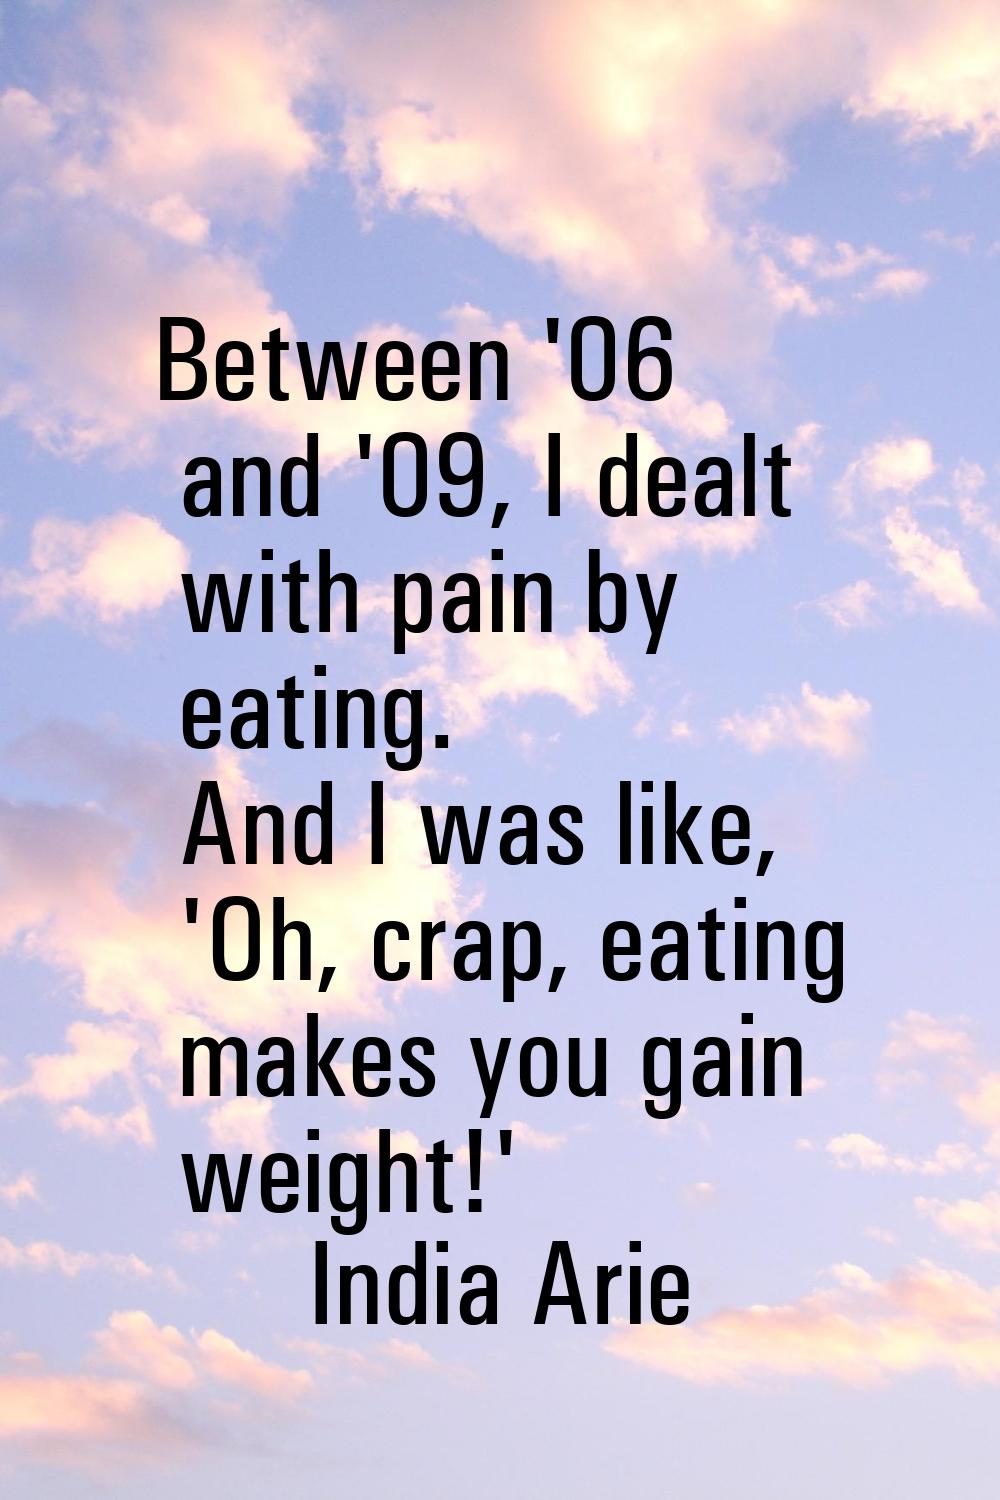 Between '06 and '09, I dealt with pain by eating. And I was like, 'Oh, crap, eating makes you gain 